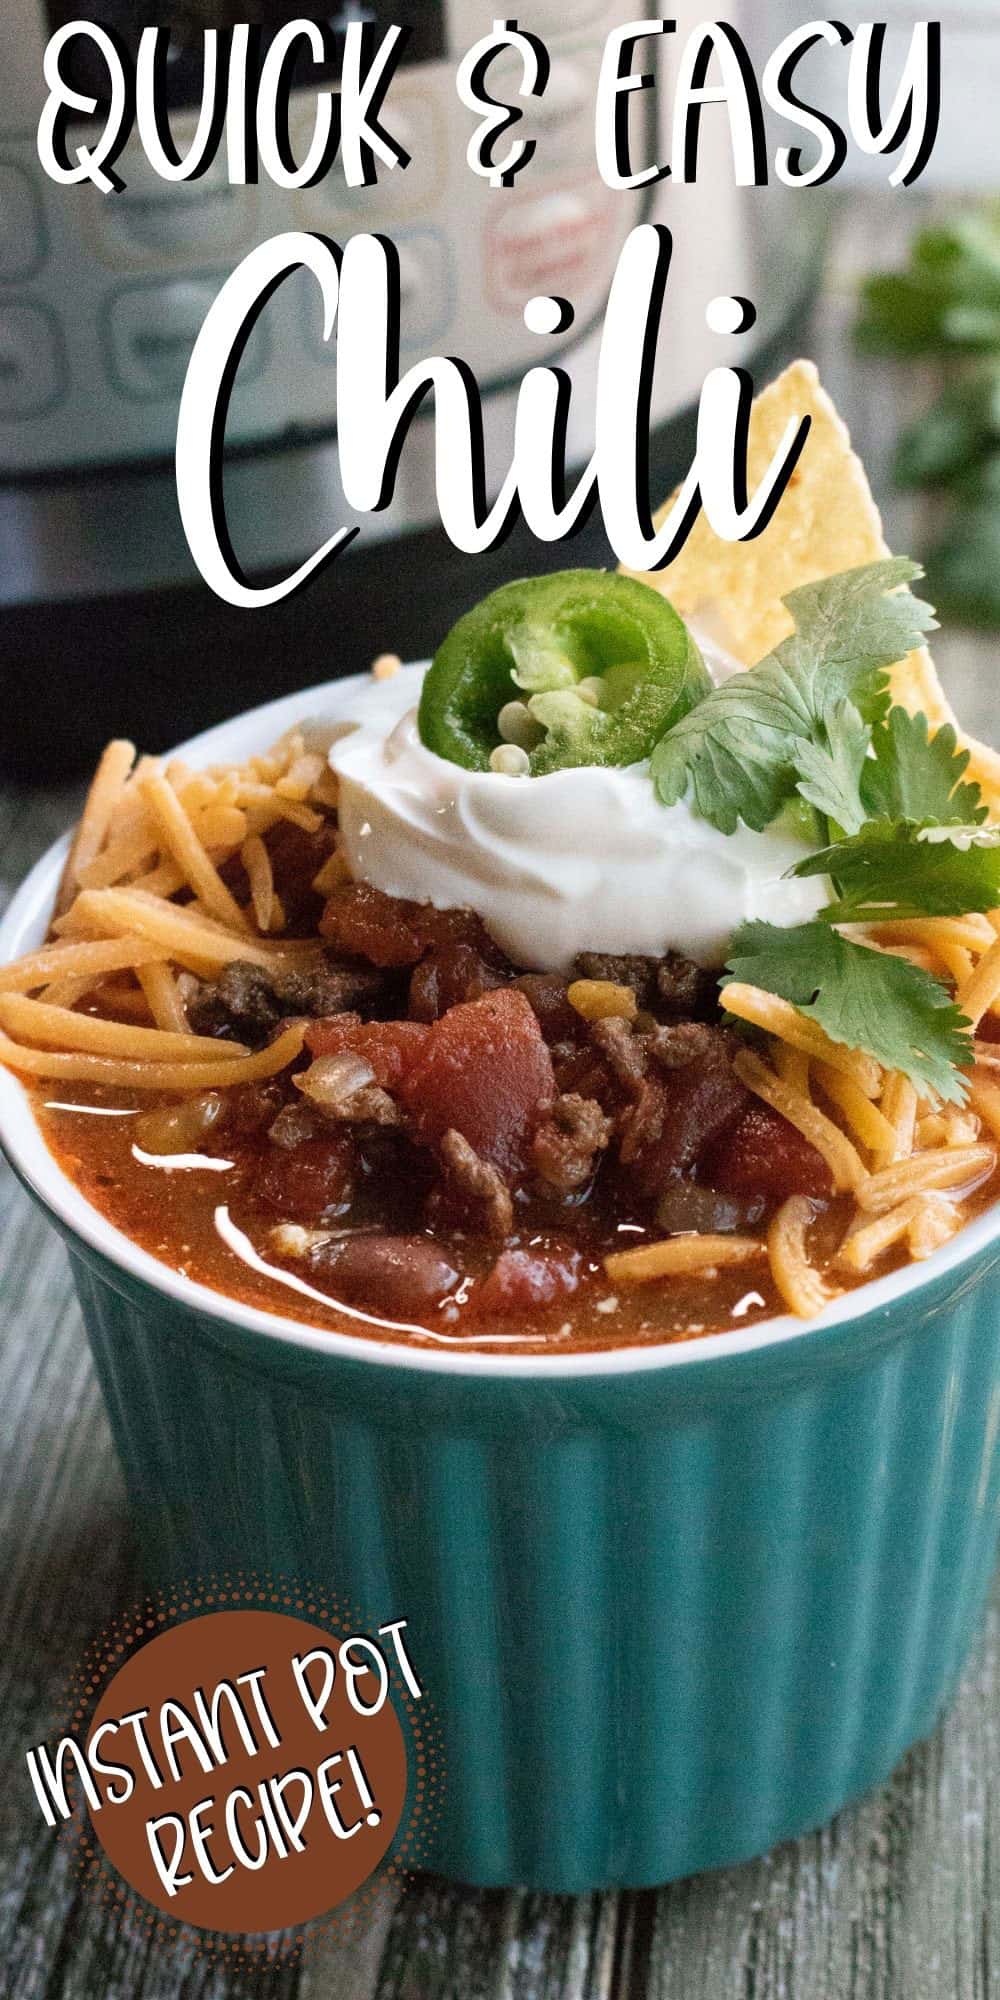 TEAL mug filled with chili, topped with cheese and sour cream